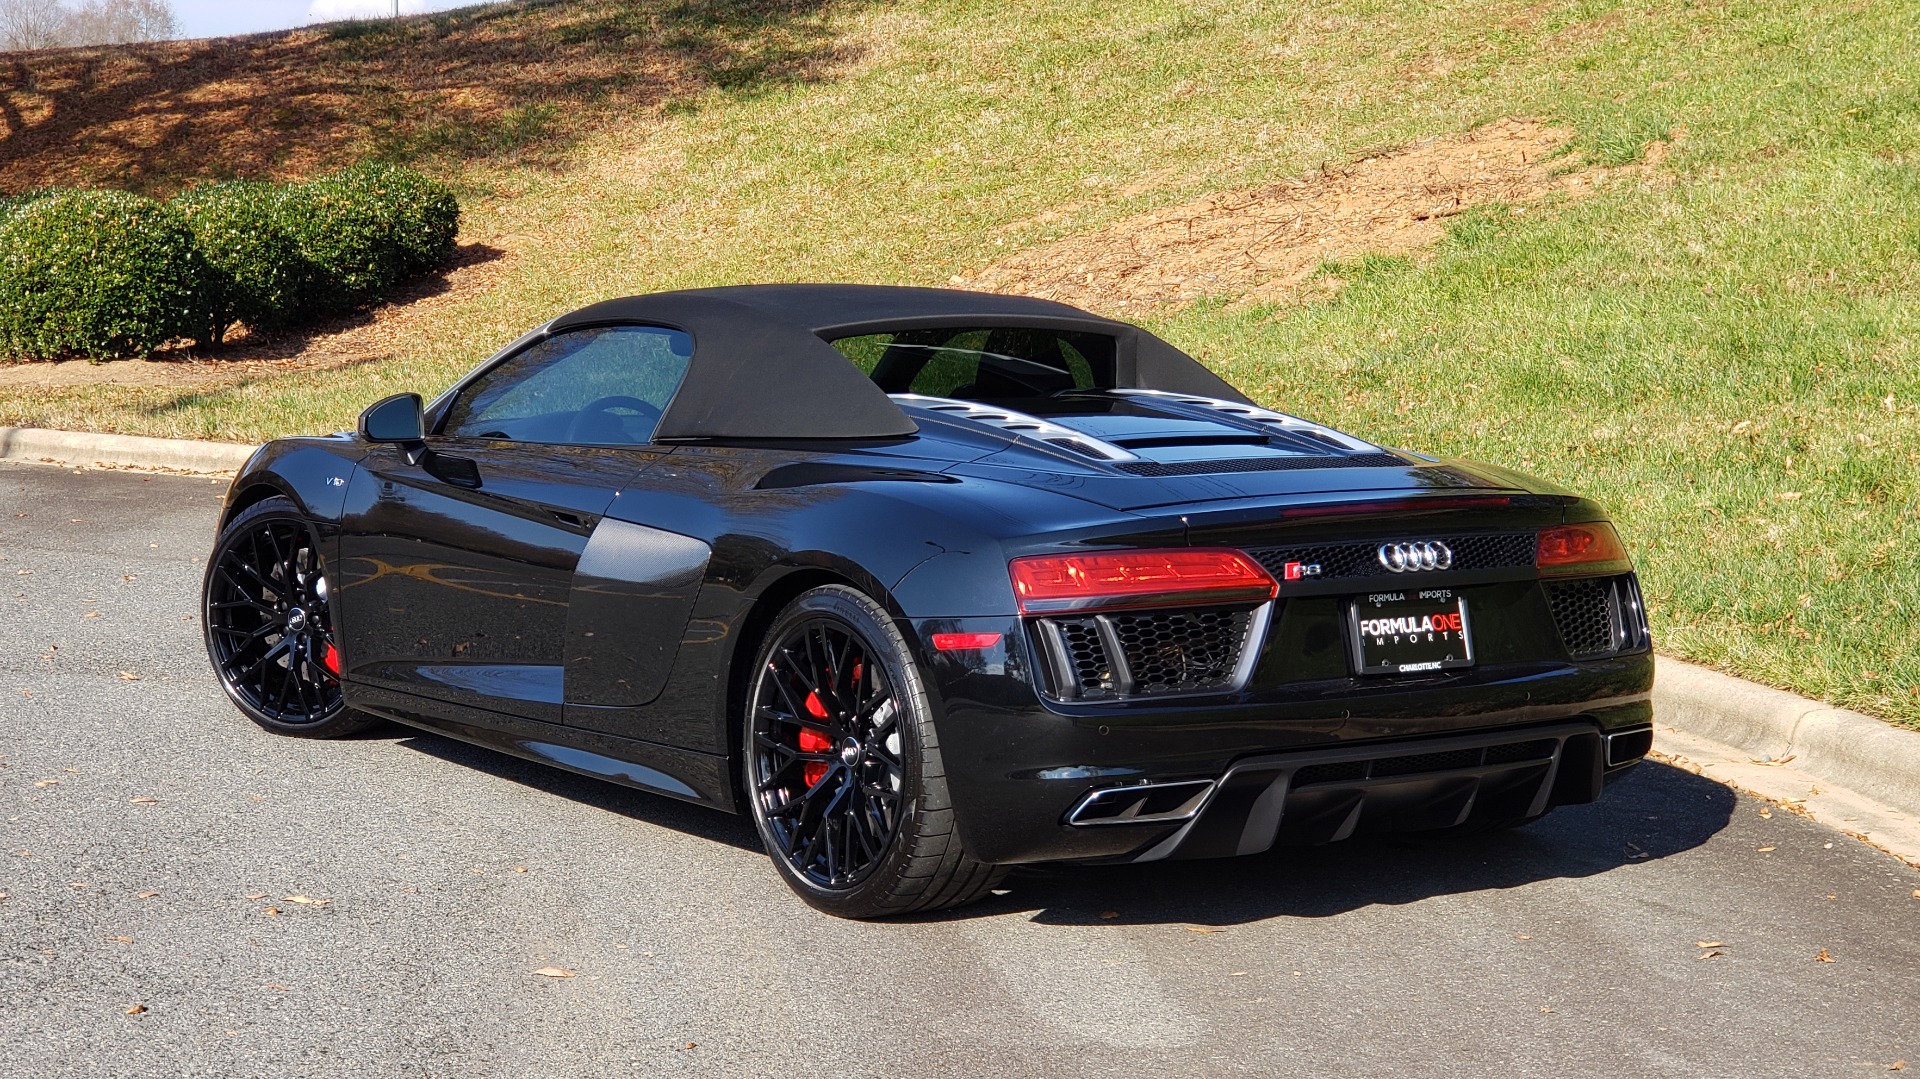 Used 2017 Audi R8 SPYDER V10 S-TRONIC / CARBON EXT & INT PKG / NAV / REARVIEW for sale Sold at Formula Imports in Charlotte NC 28227 8